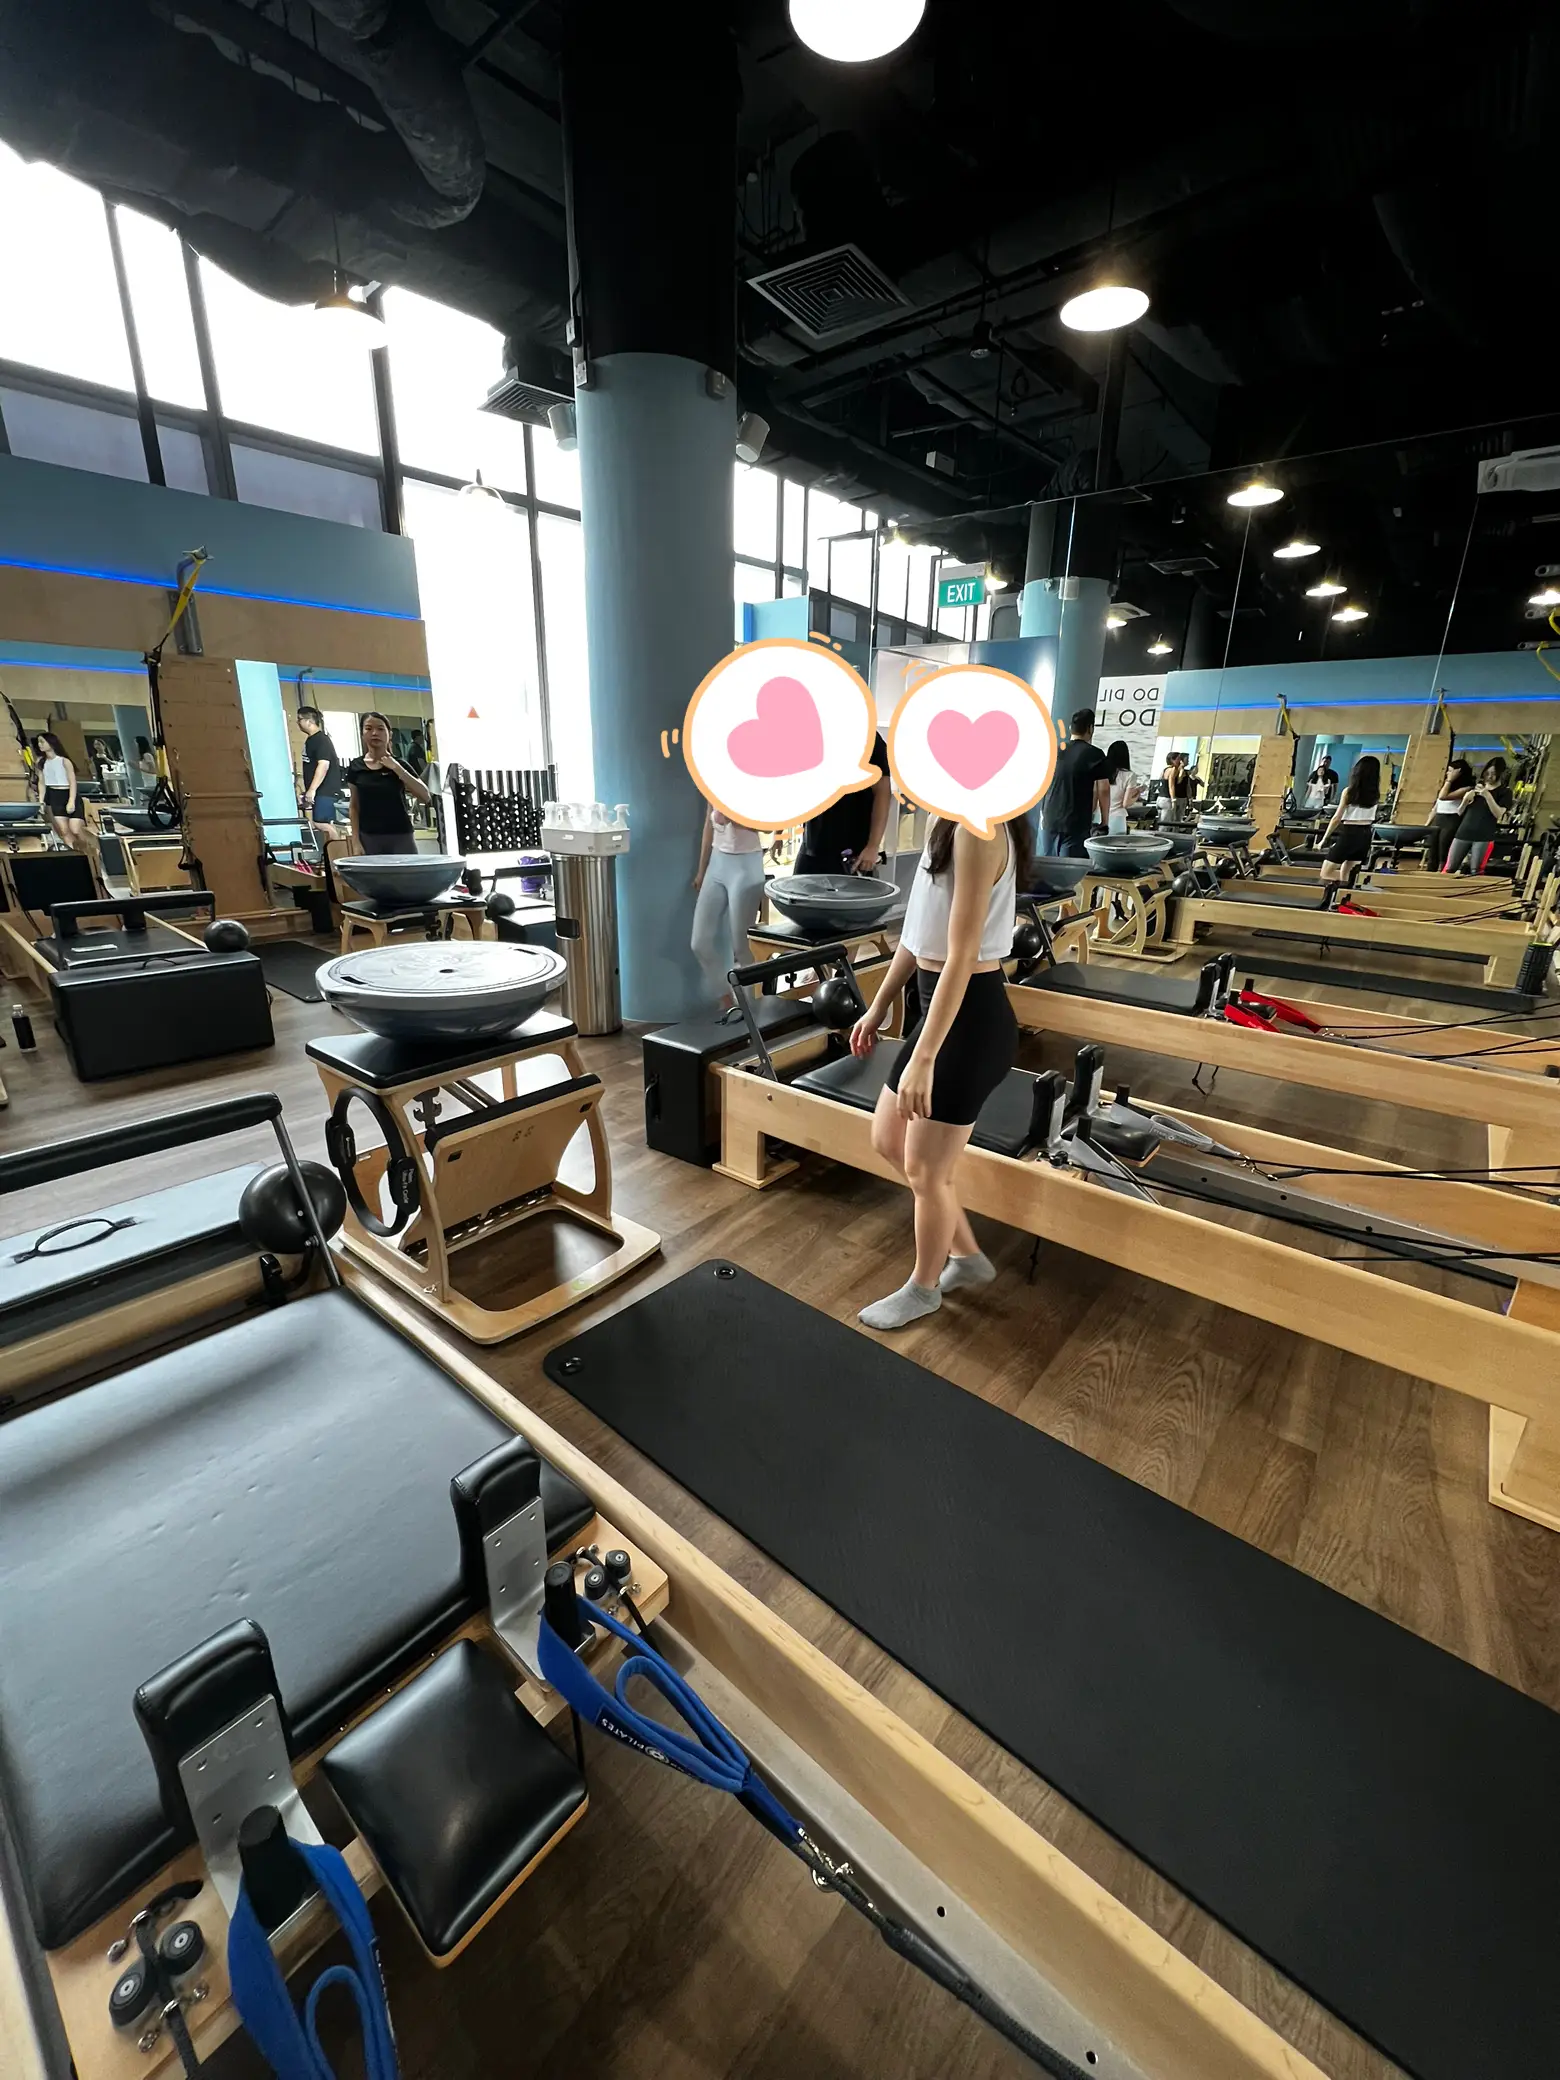 Is Being A “Pilates Princess” Worth The Hype?